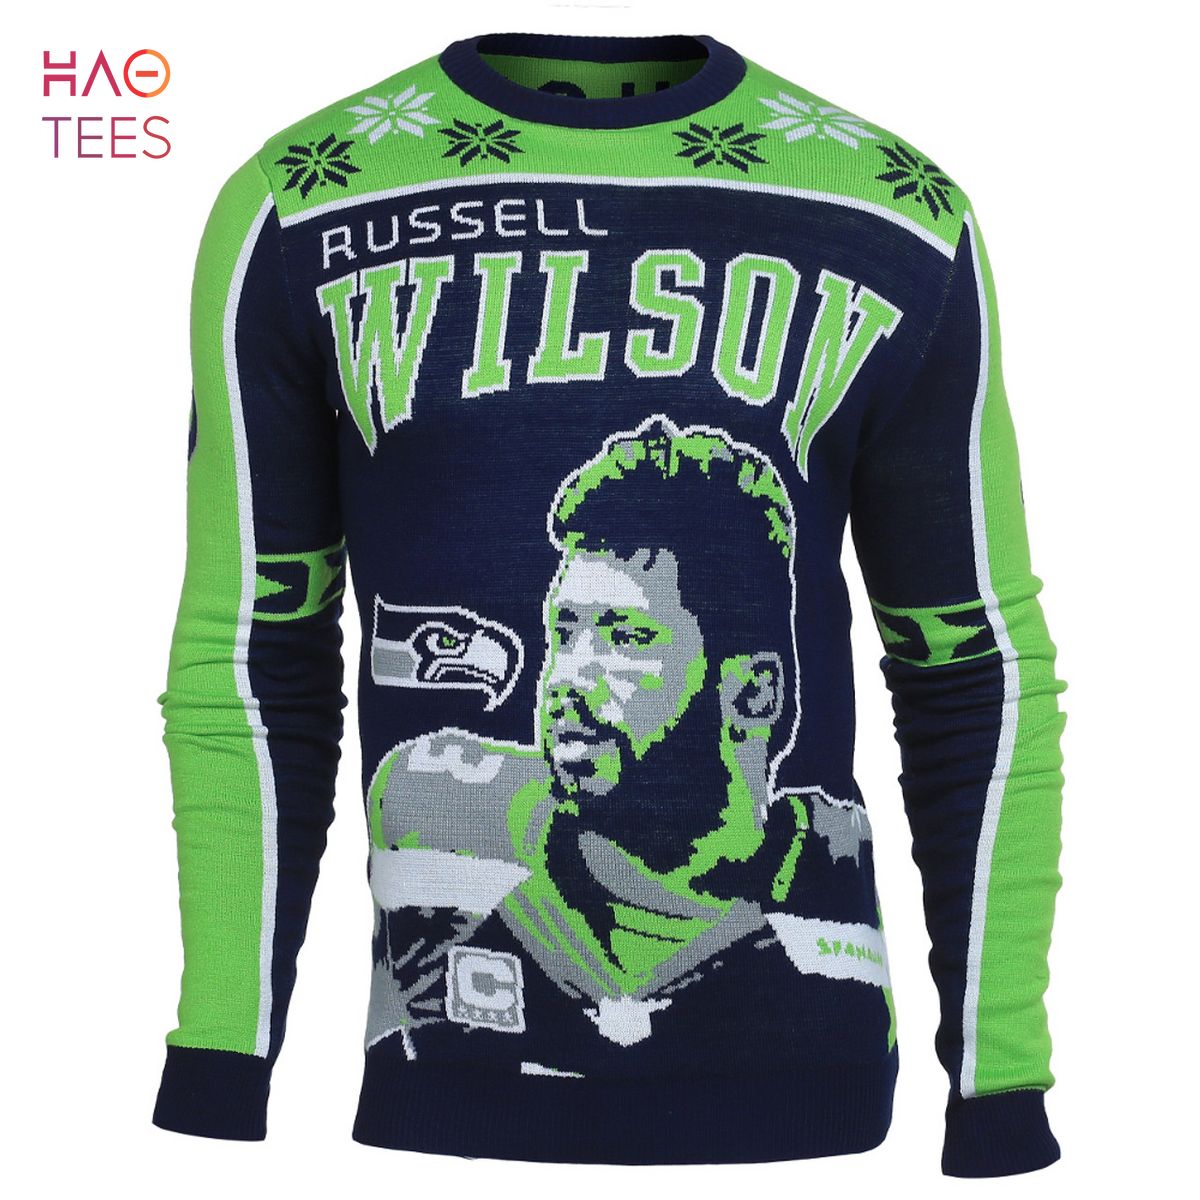 BEST Russell Wilson 3 Seattle Seahawks NFL Player Ugly Sweater